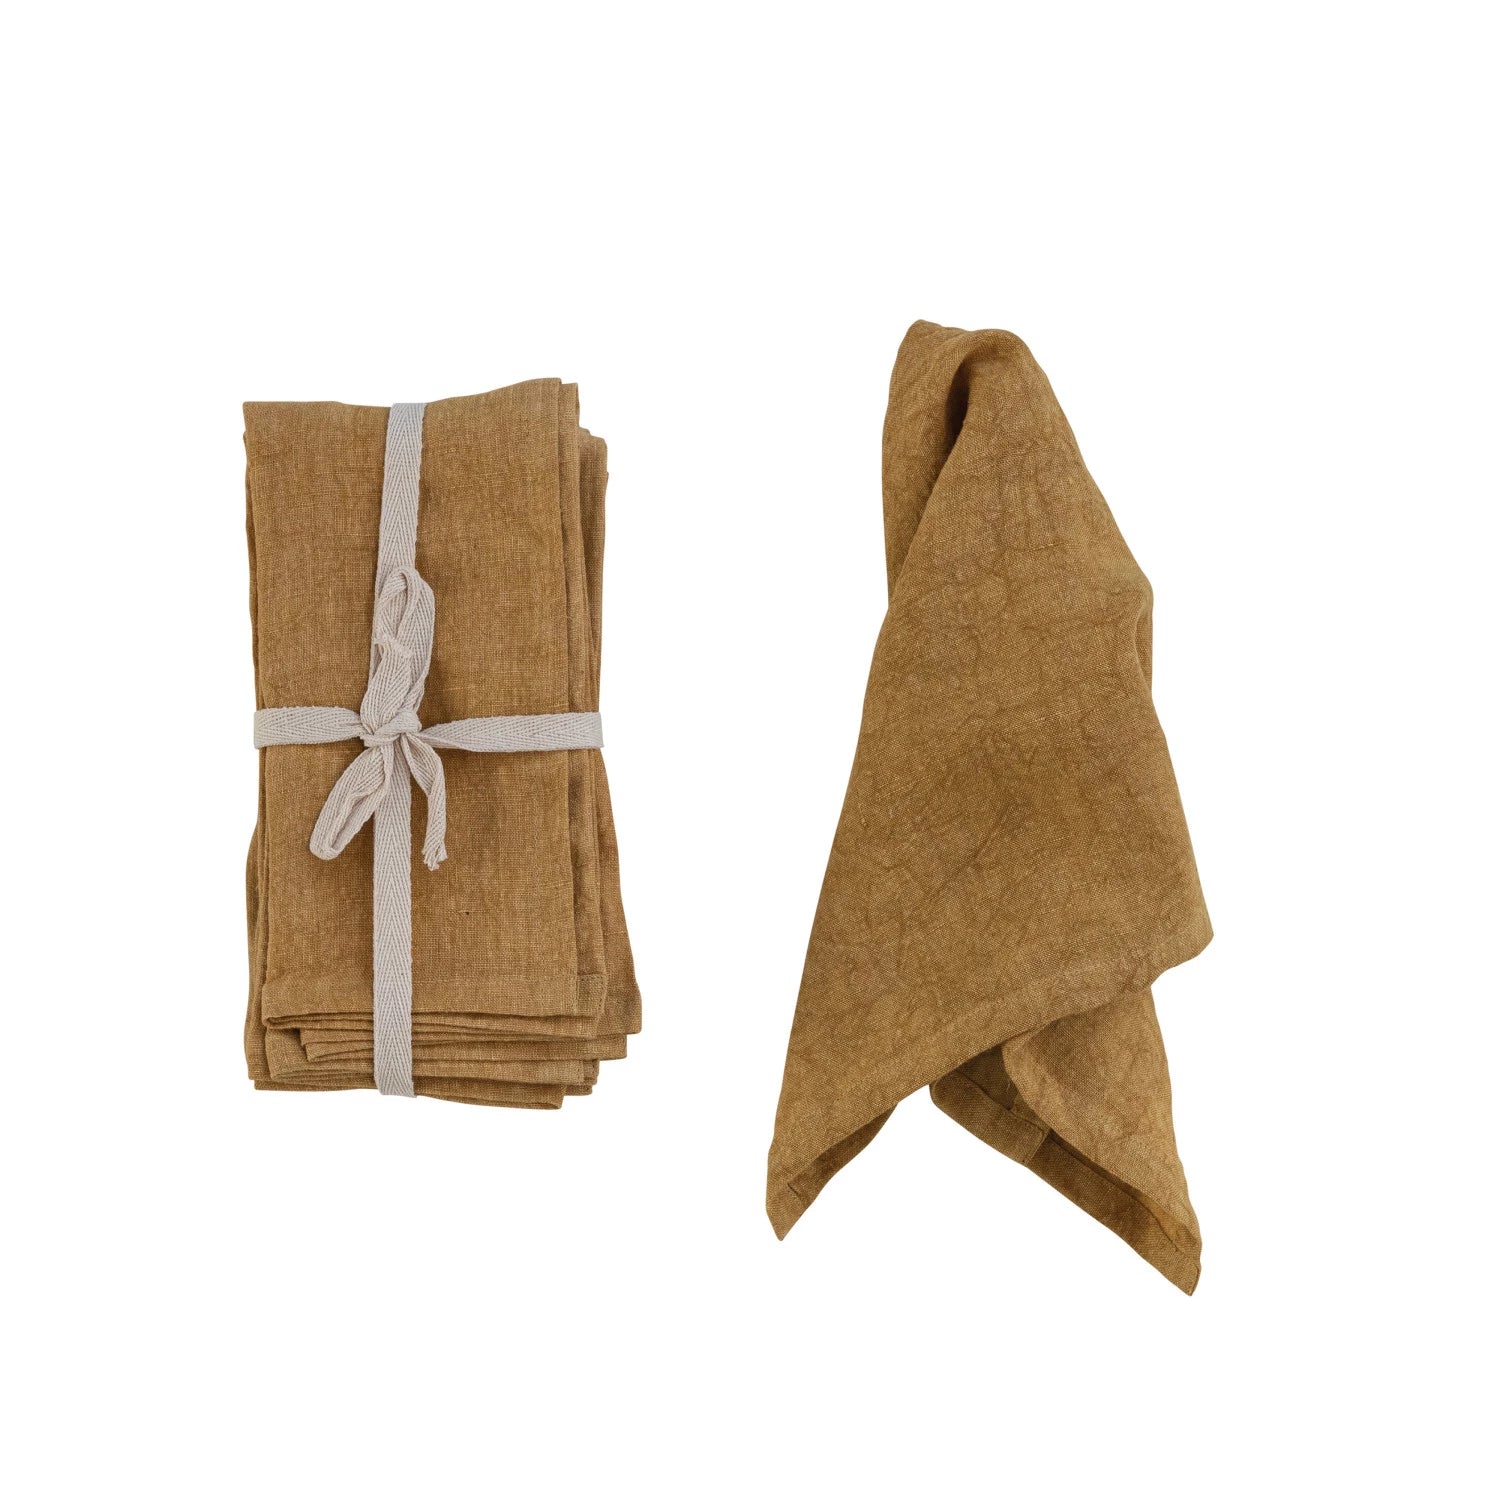 set of folded gold Stonewashed Linen Napkins tied with ribbon and one displayed draped over itself on a white background